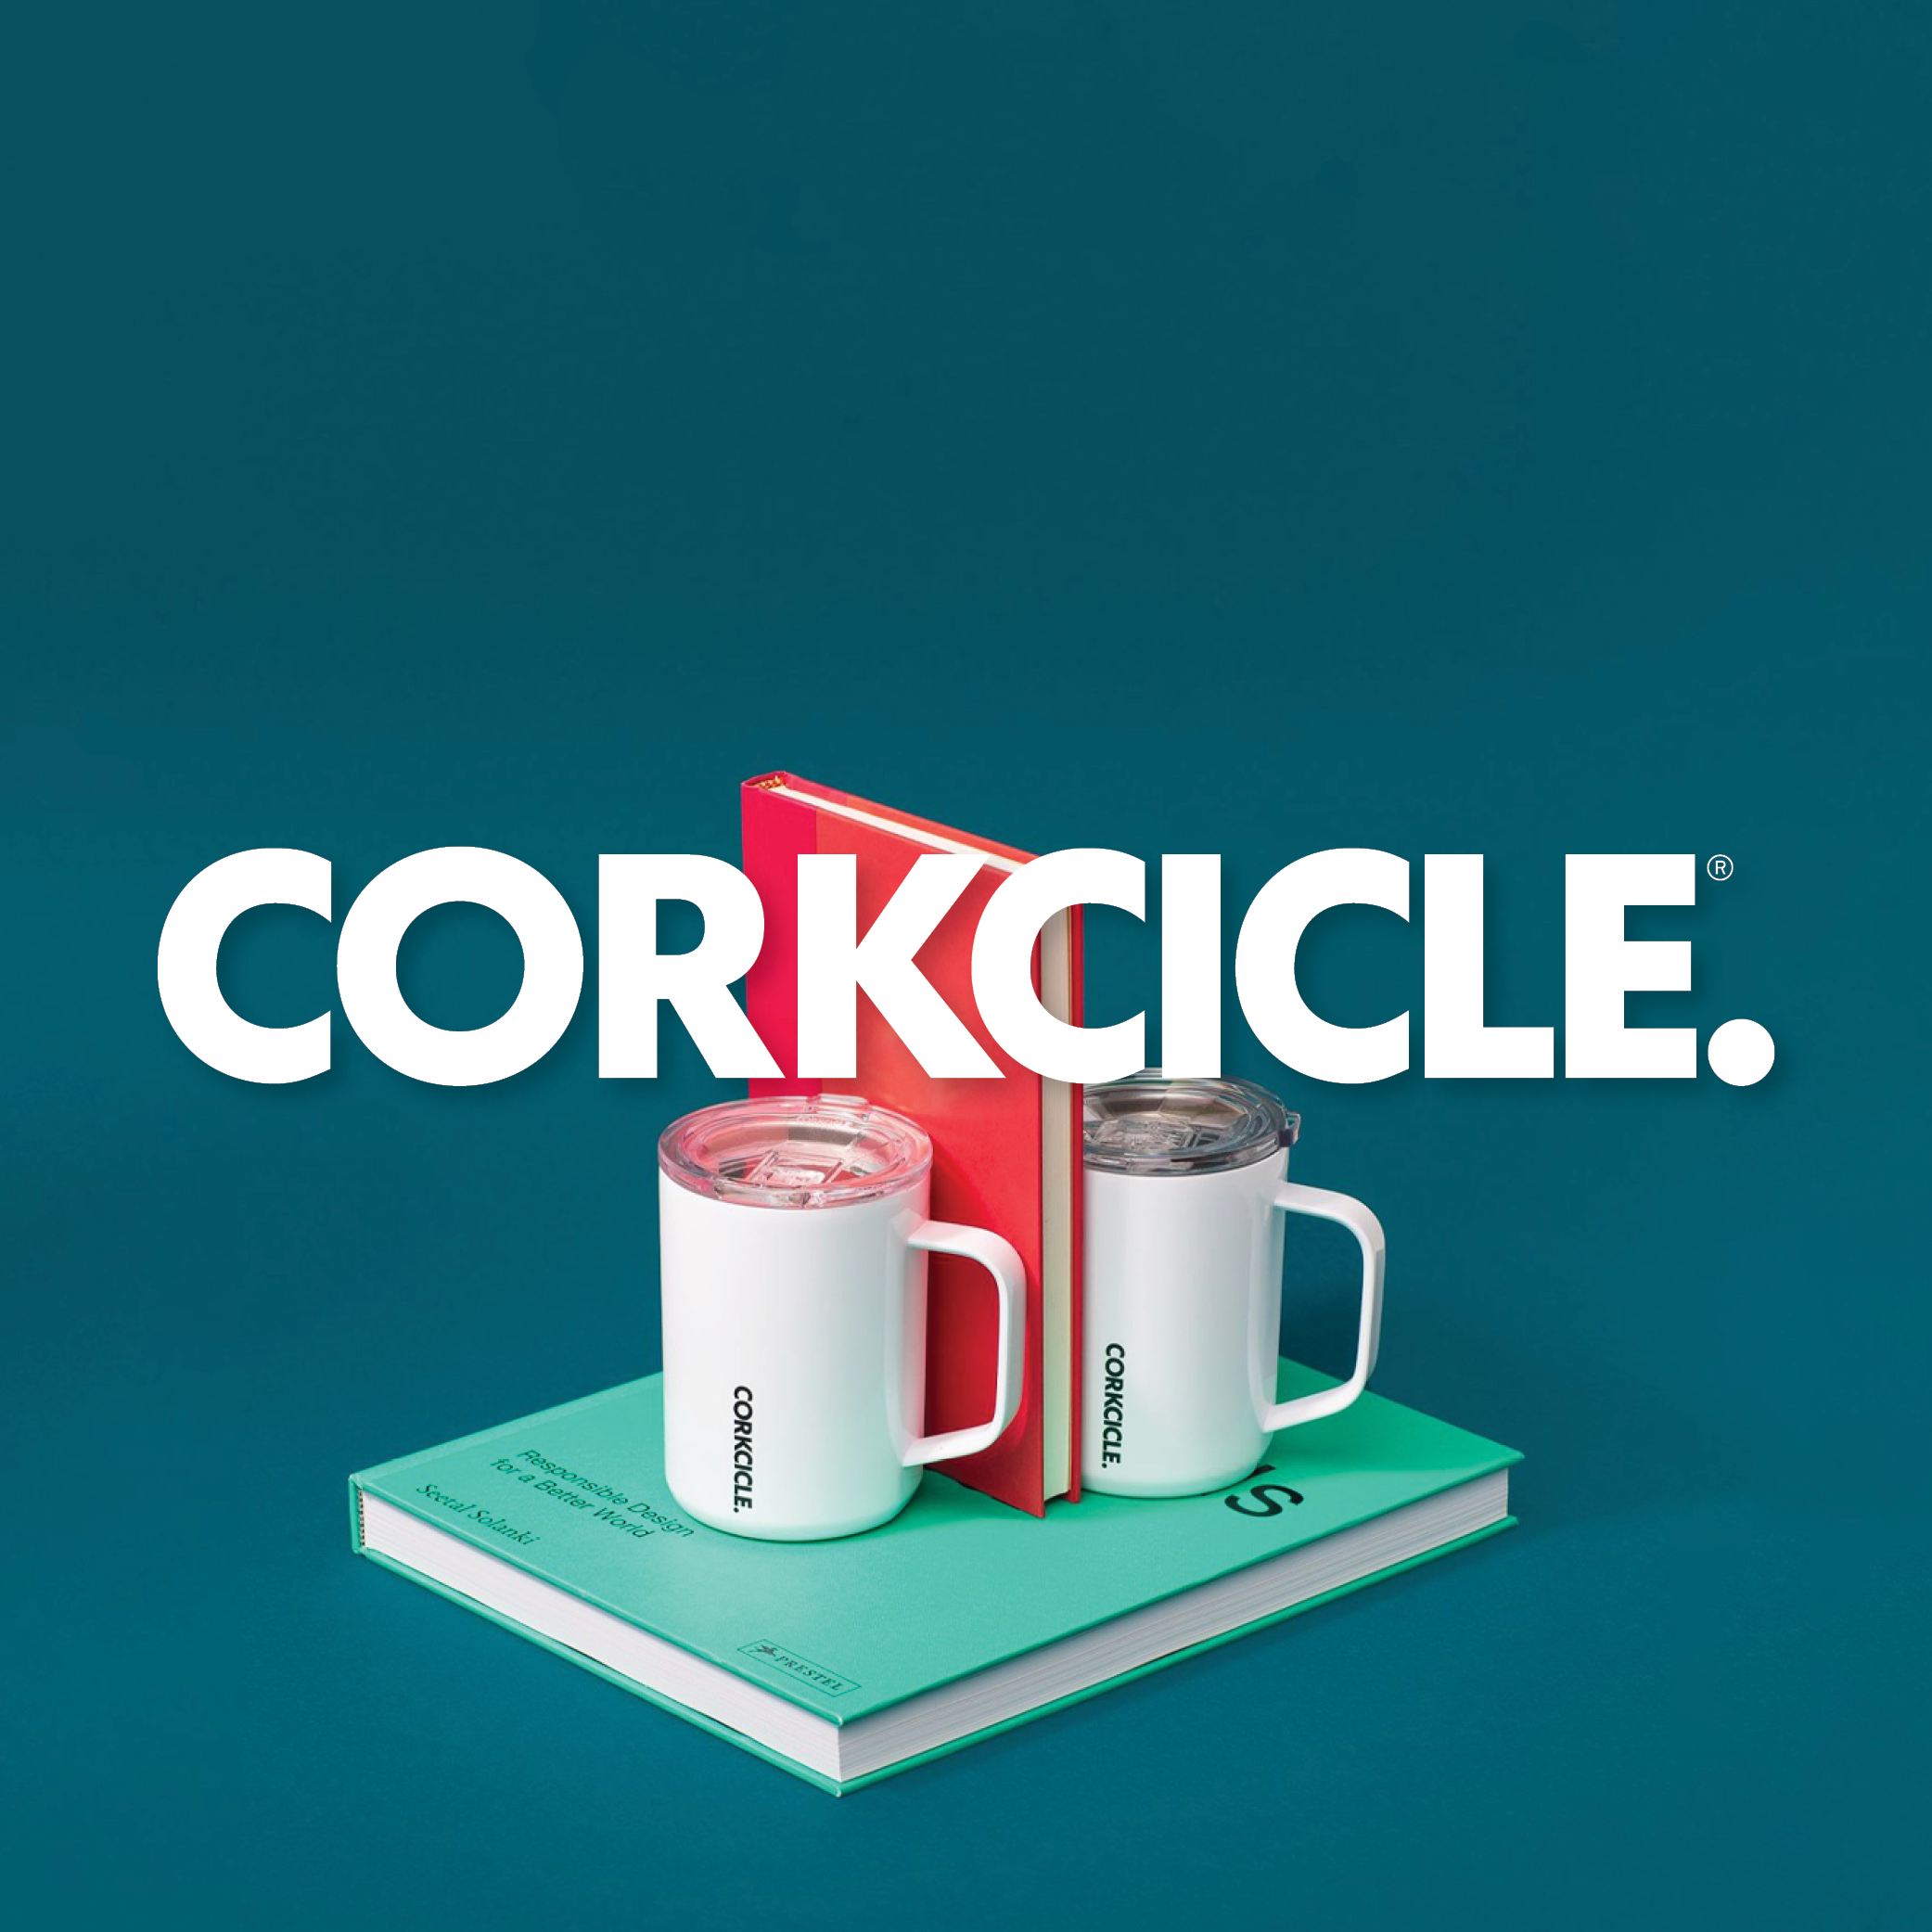 Two white corkcicle mugs with red book in the middle and blue book beneath